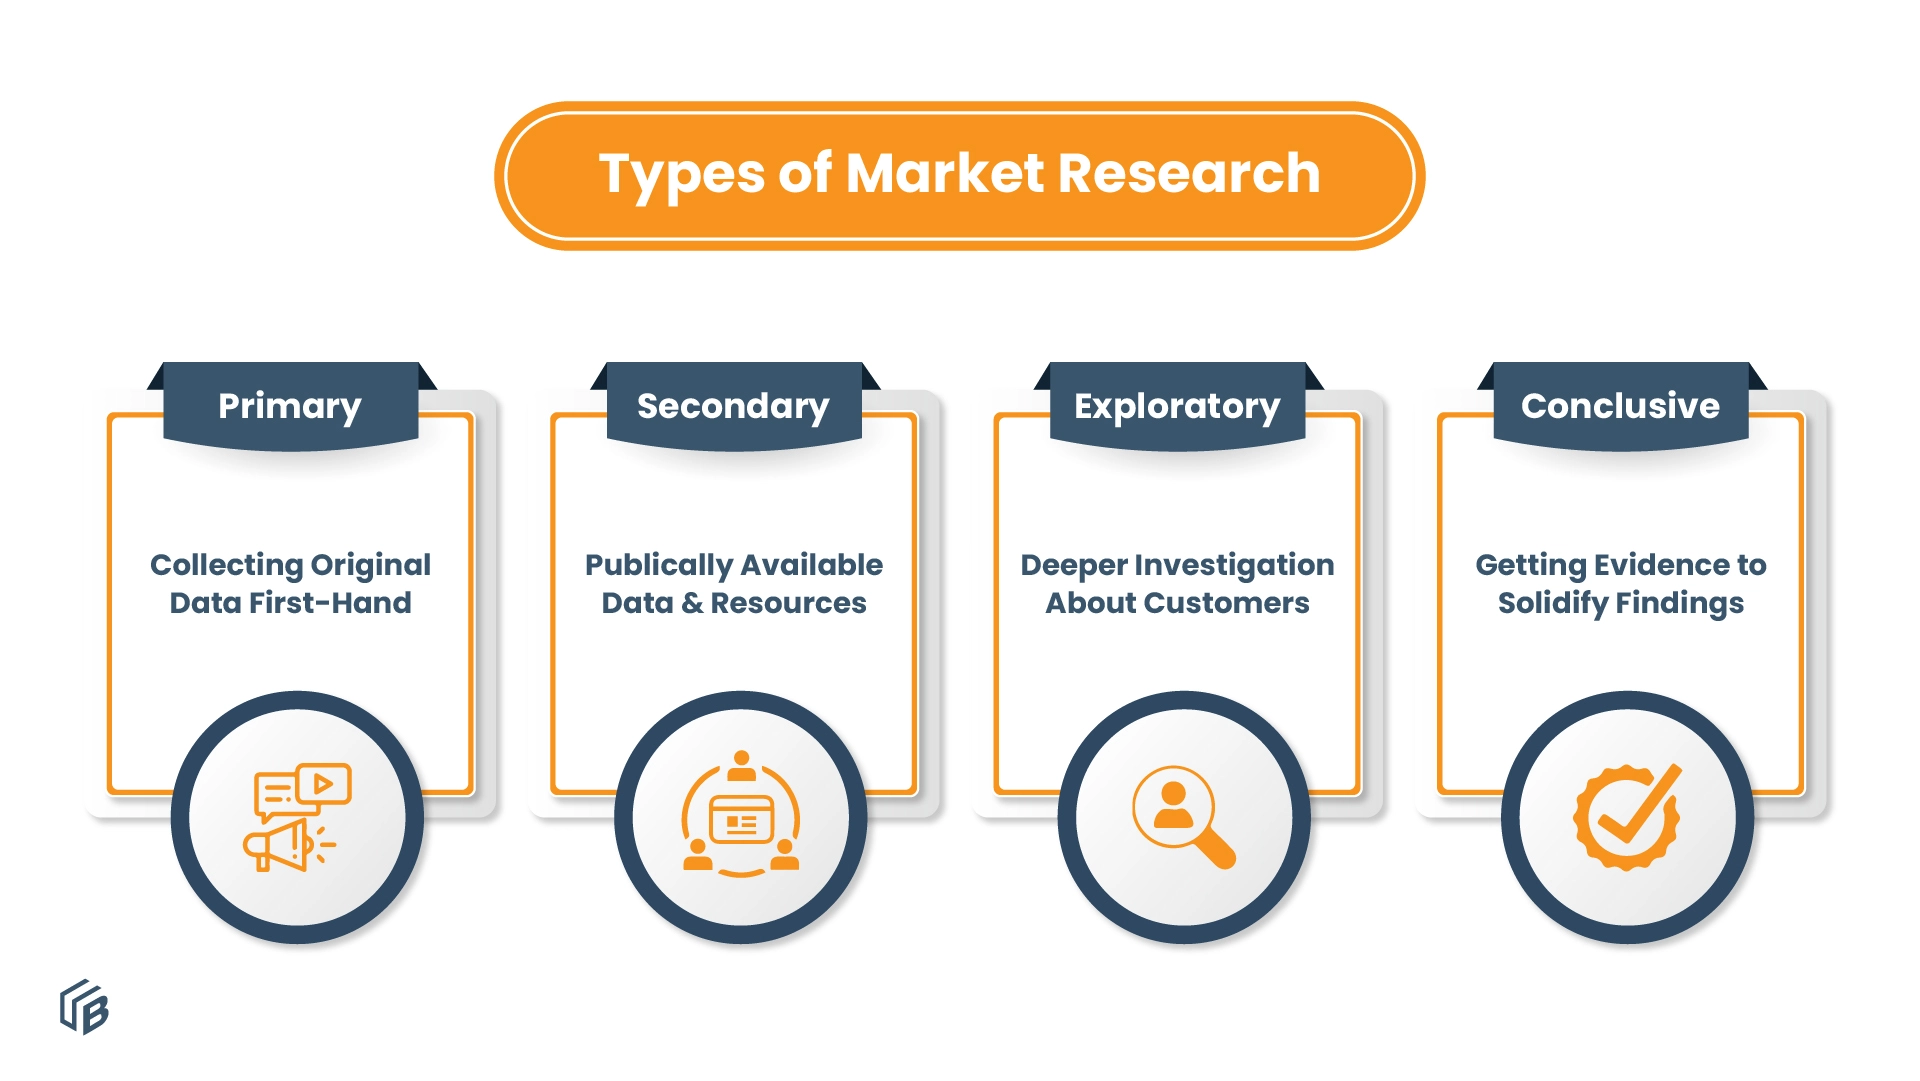 Types of Market Research